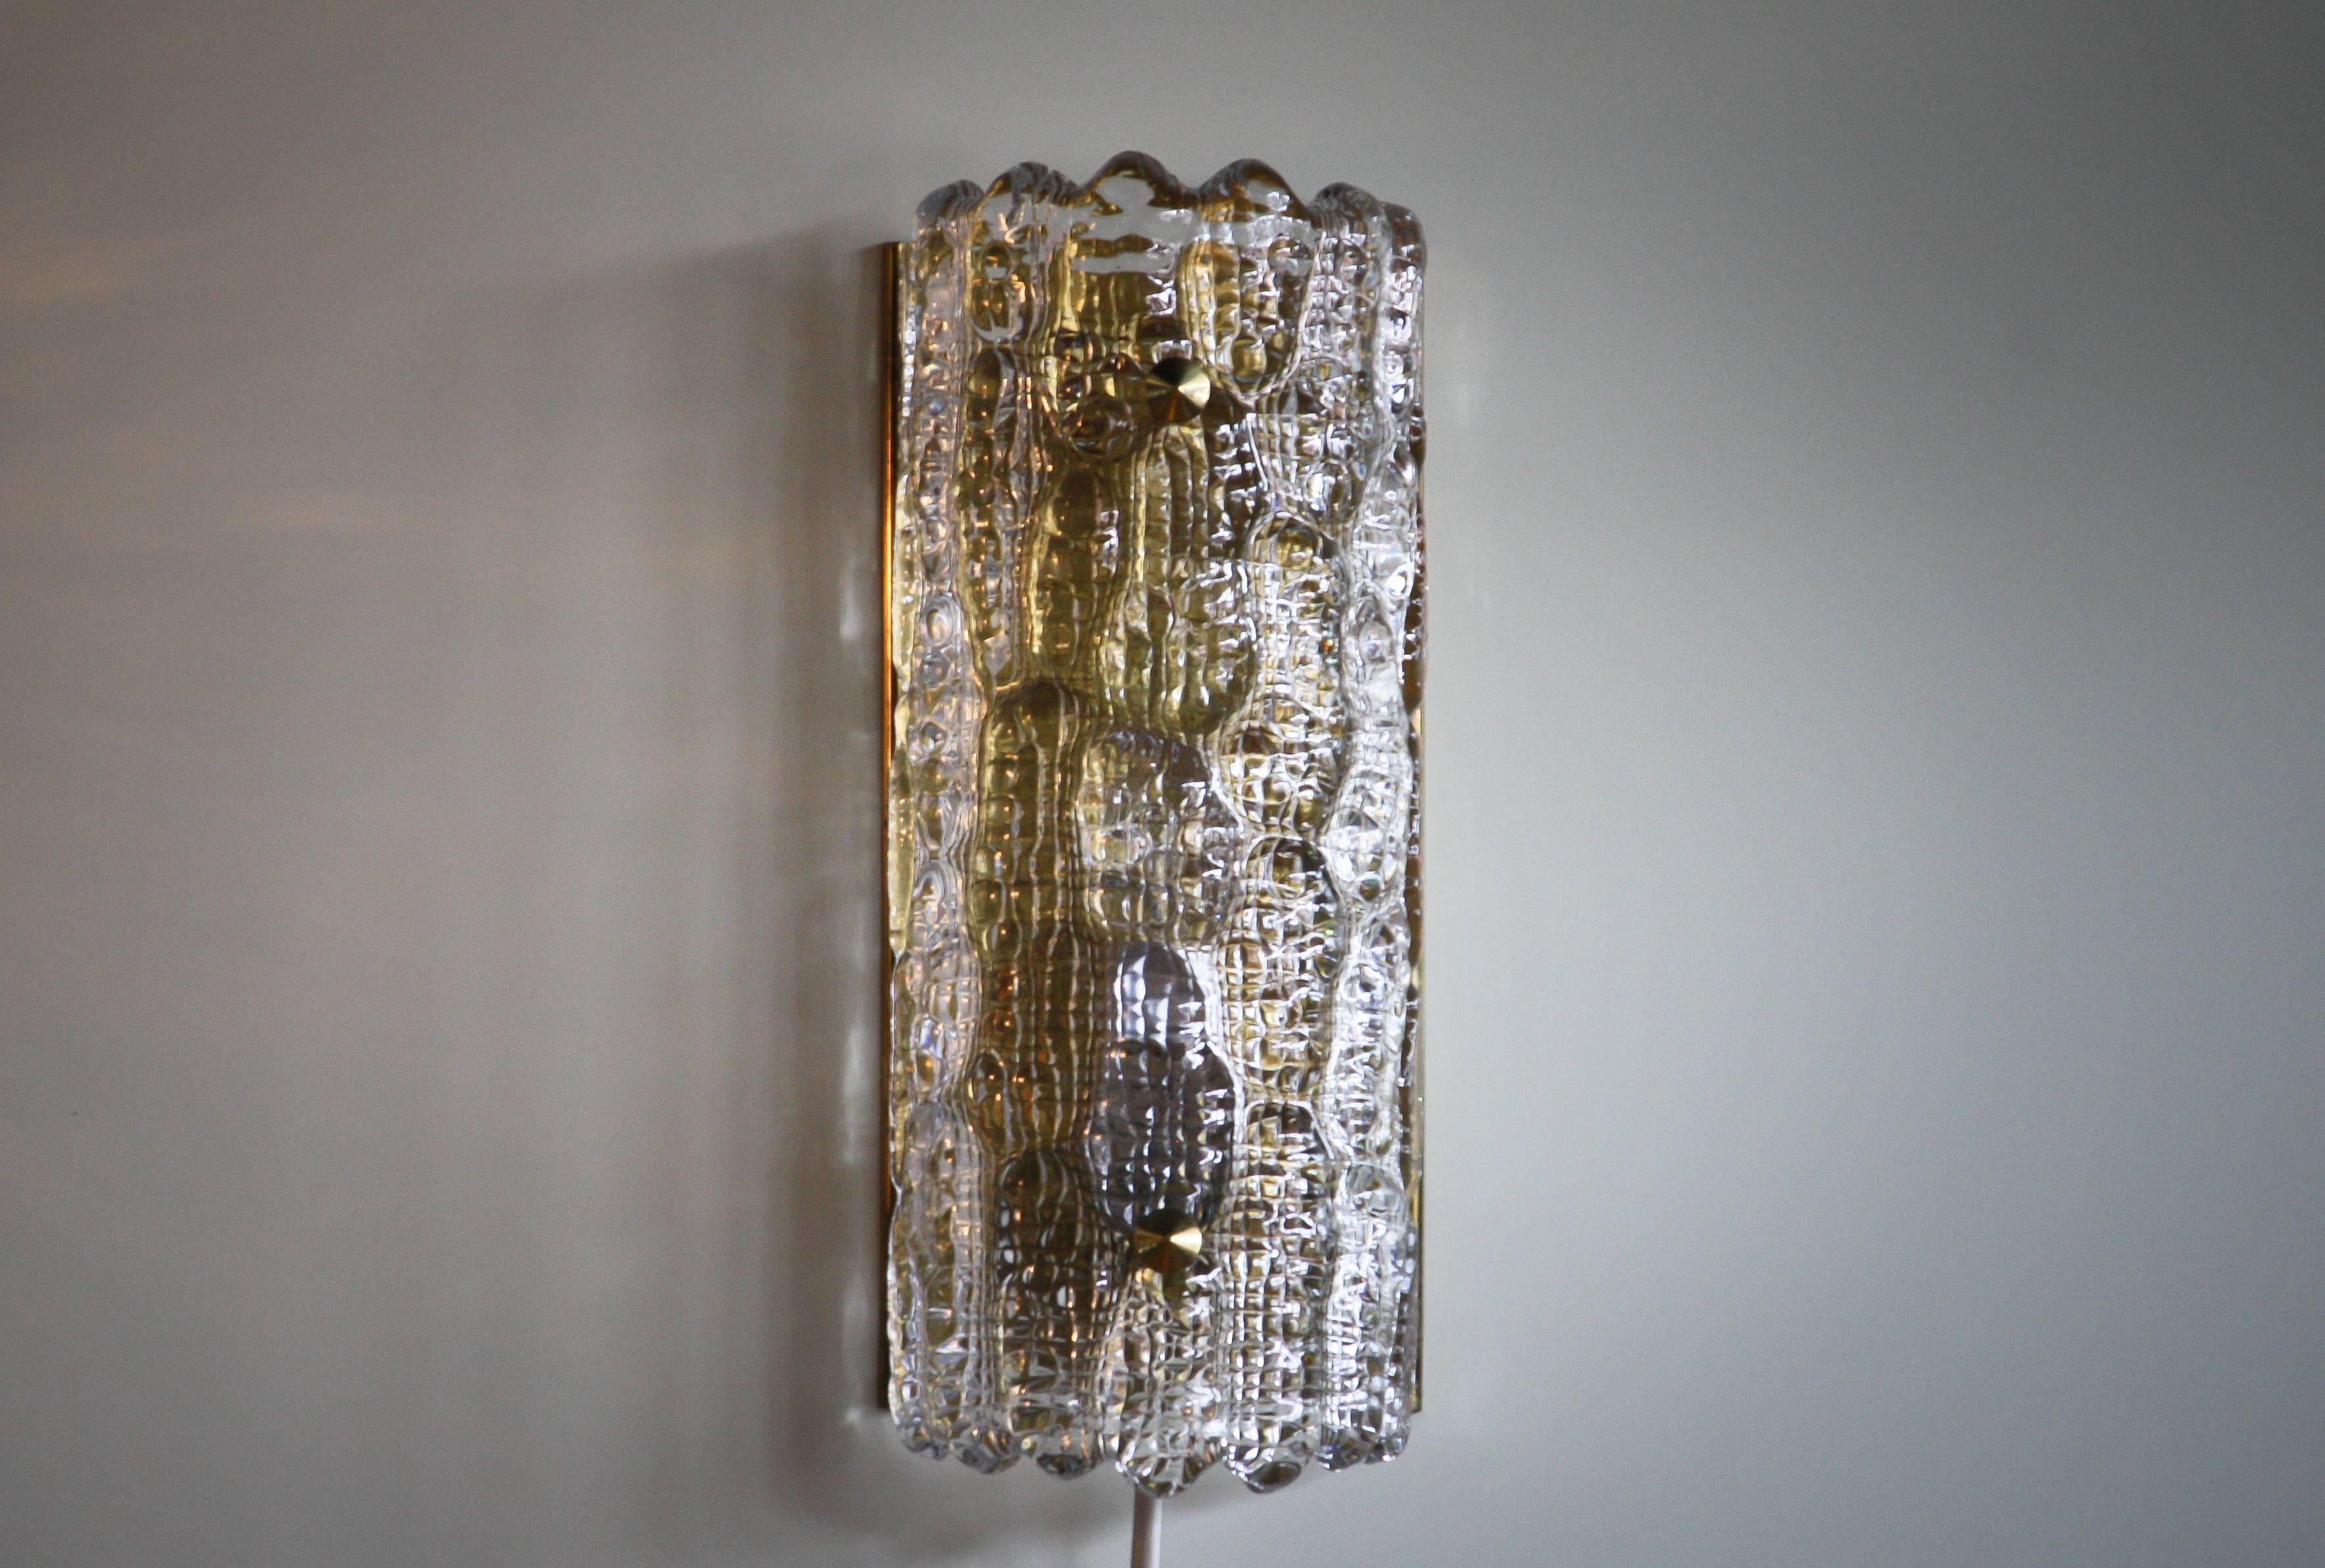 Beautiful wall light designed by Carl Fagerlund for Orrefors, Sweden.
This lamp is made of brass and crystal textured glass shade what reflect a wonderful light.
Period 1960s
Dimensions: H 28 cm, W.12 cm, D.8 cm.